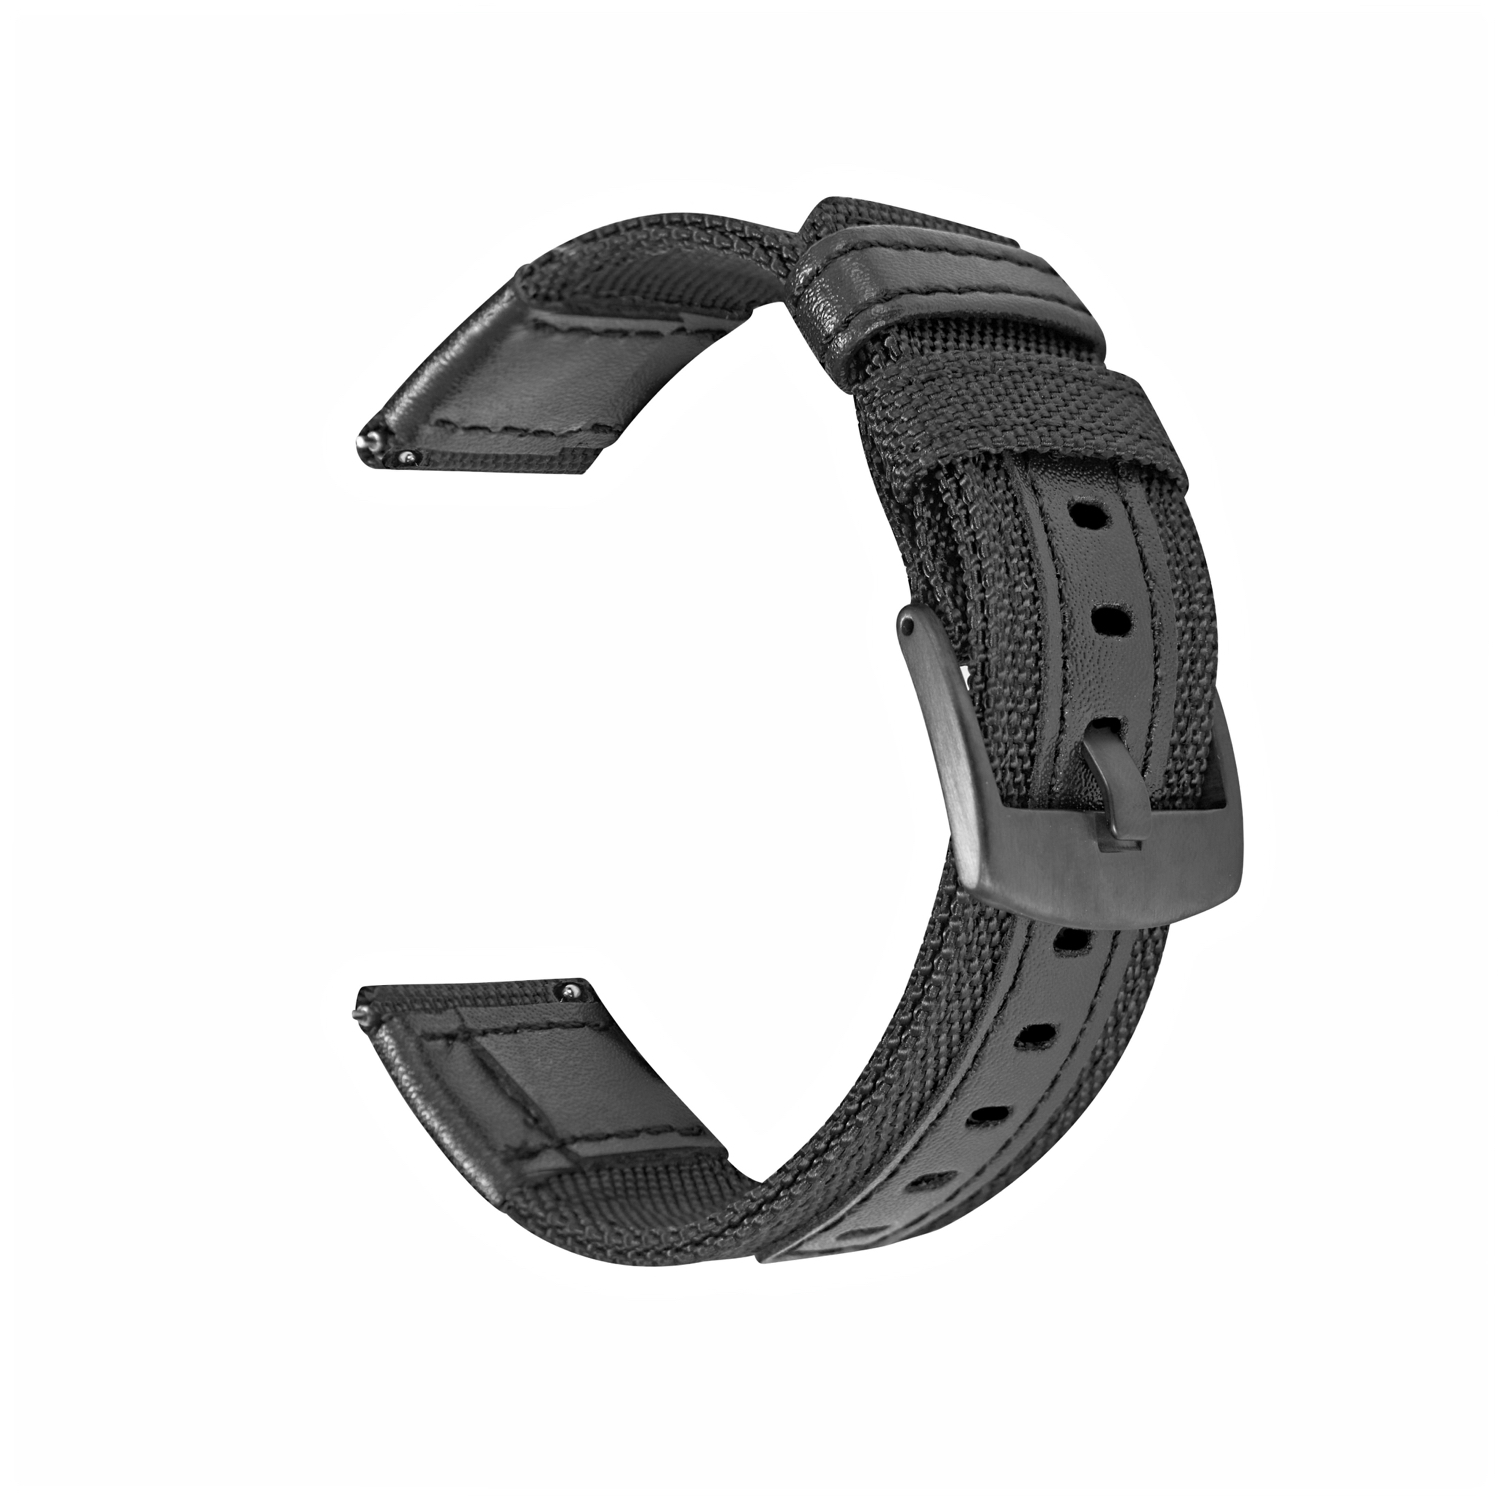 Bakeey-2022mm-Width-Canvas-Nylon-Woven--Leather-Watch-Band-Strap-Replacement-for-Samsung-Gear-S3-Hua-1773675-10